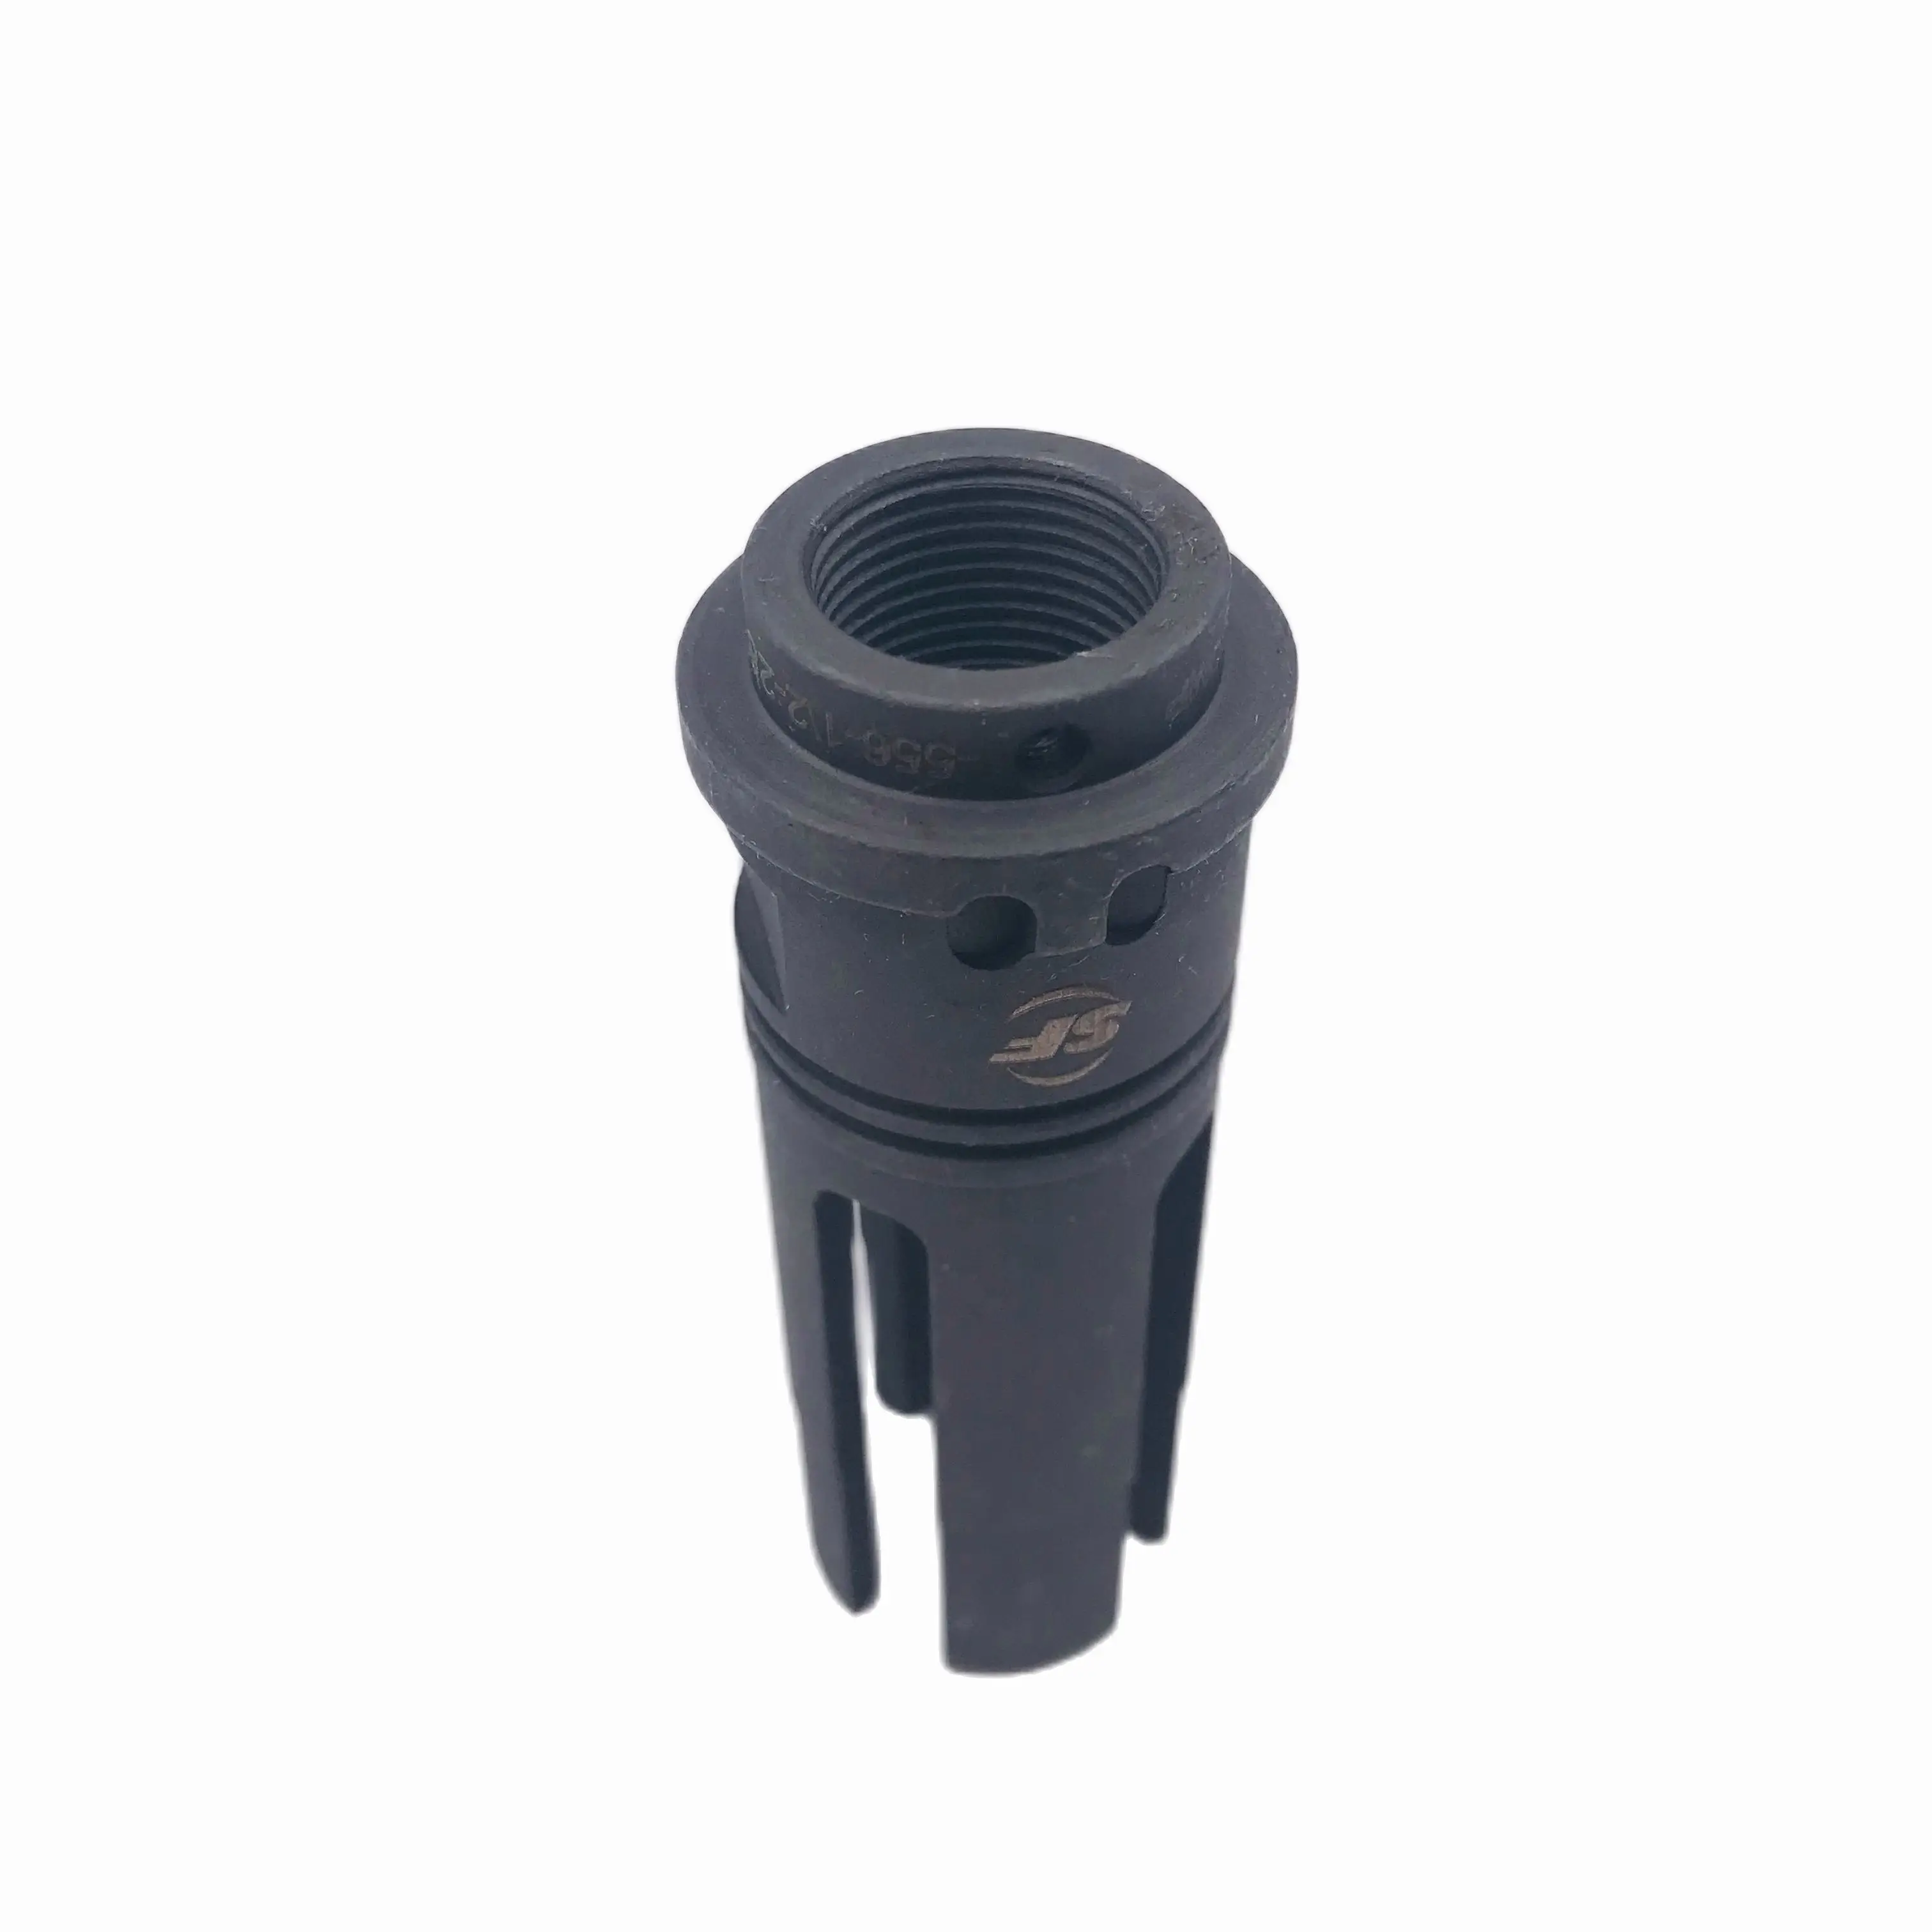 

14MM CCW Thread Metal Steel Fire Cap SUREFIRE 3P Socom Flash Hider NO Function Muzzle Device For Toy Airsoft SF-4